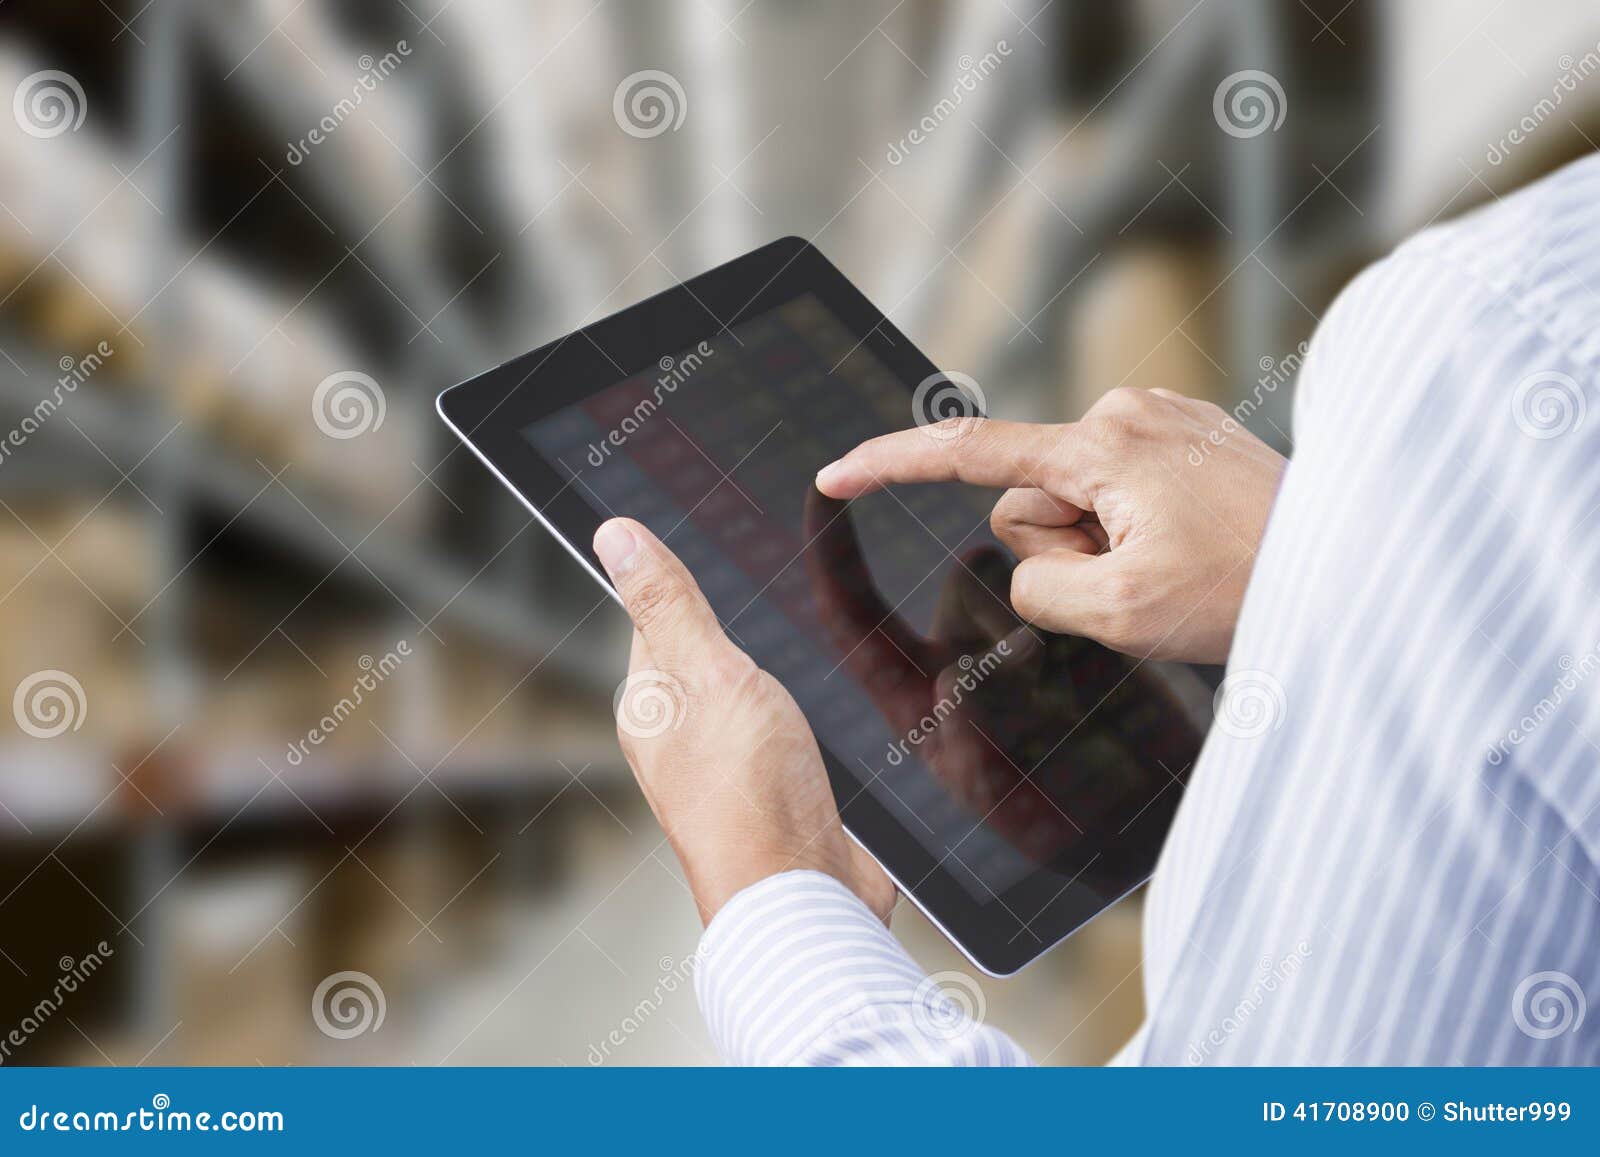 businessman checking inventory in stock room of a manufacturing company on tablet